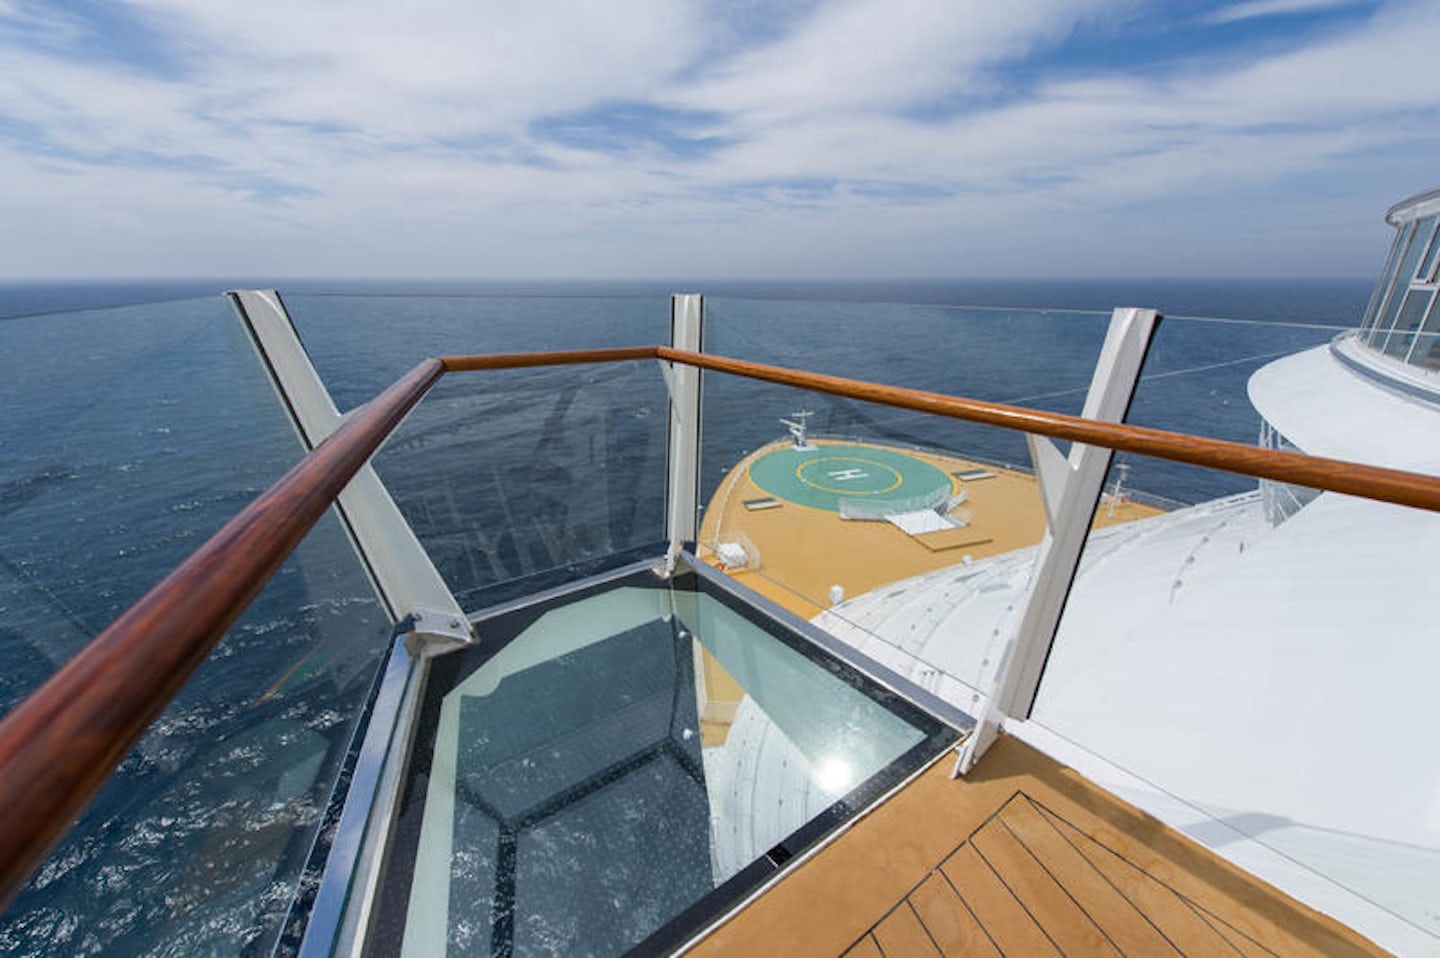 King of the World on Harmony of the Seas